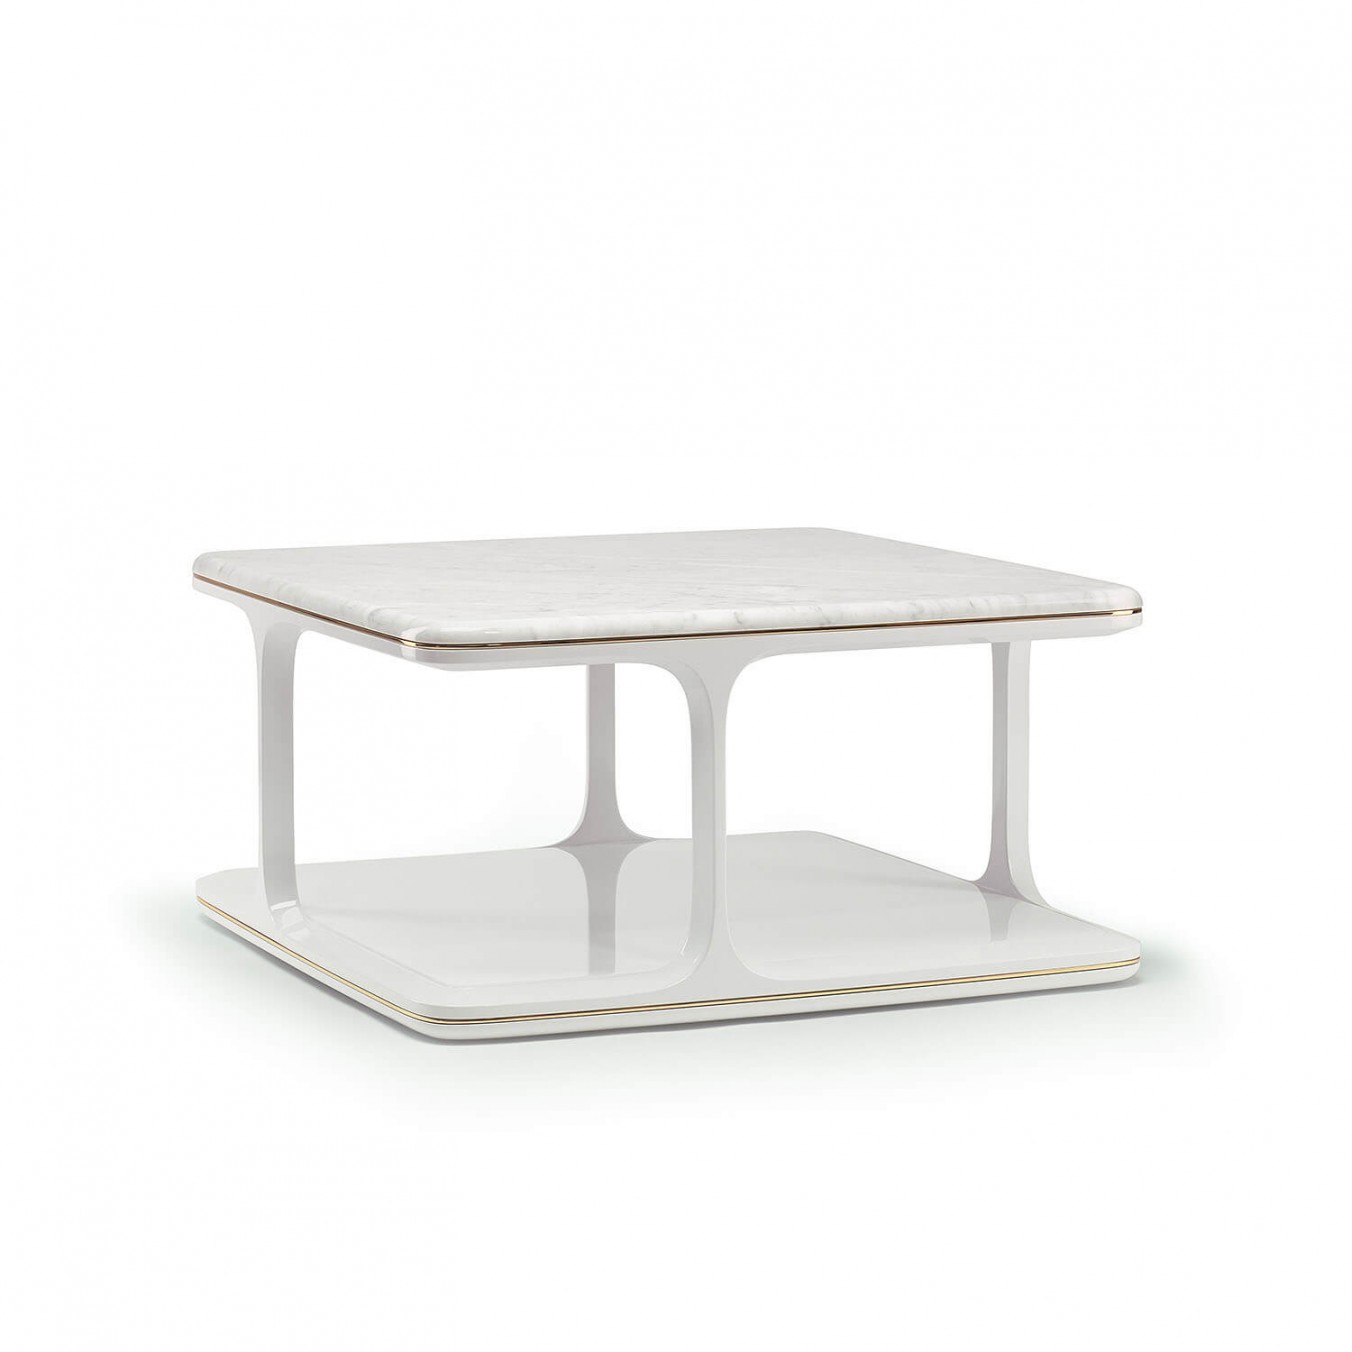 Heracles Coffee Table Small